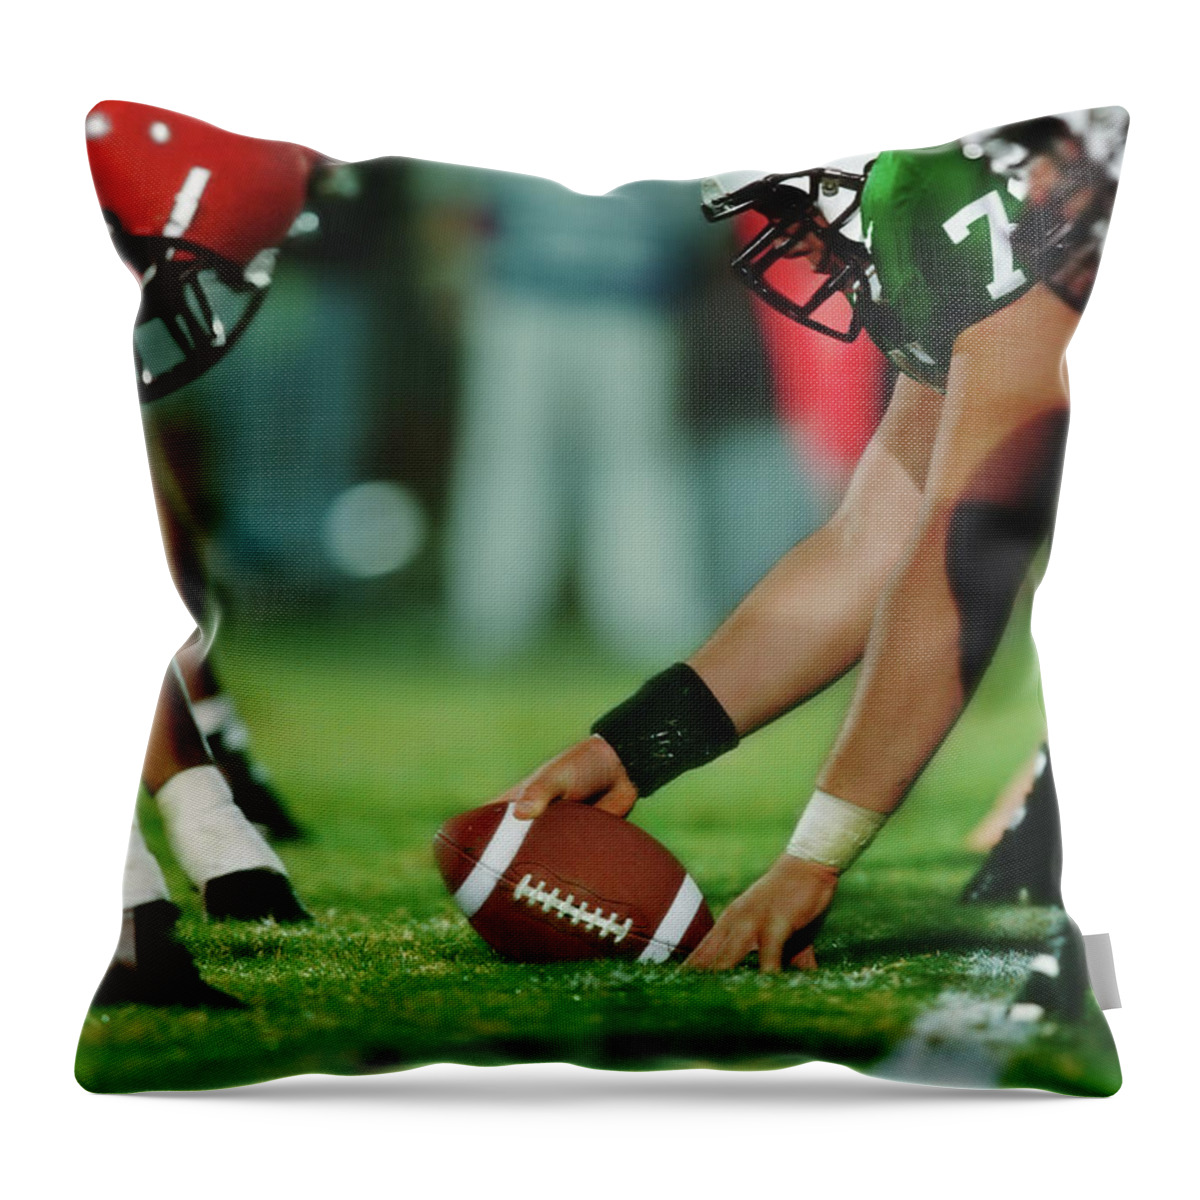 American Football Uniform Throw Pillow featuring the photograph American Football Line Of Scrimmage by David Madison